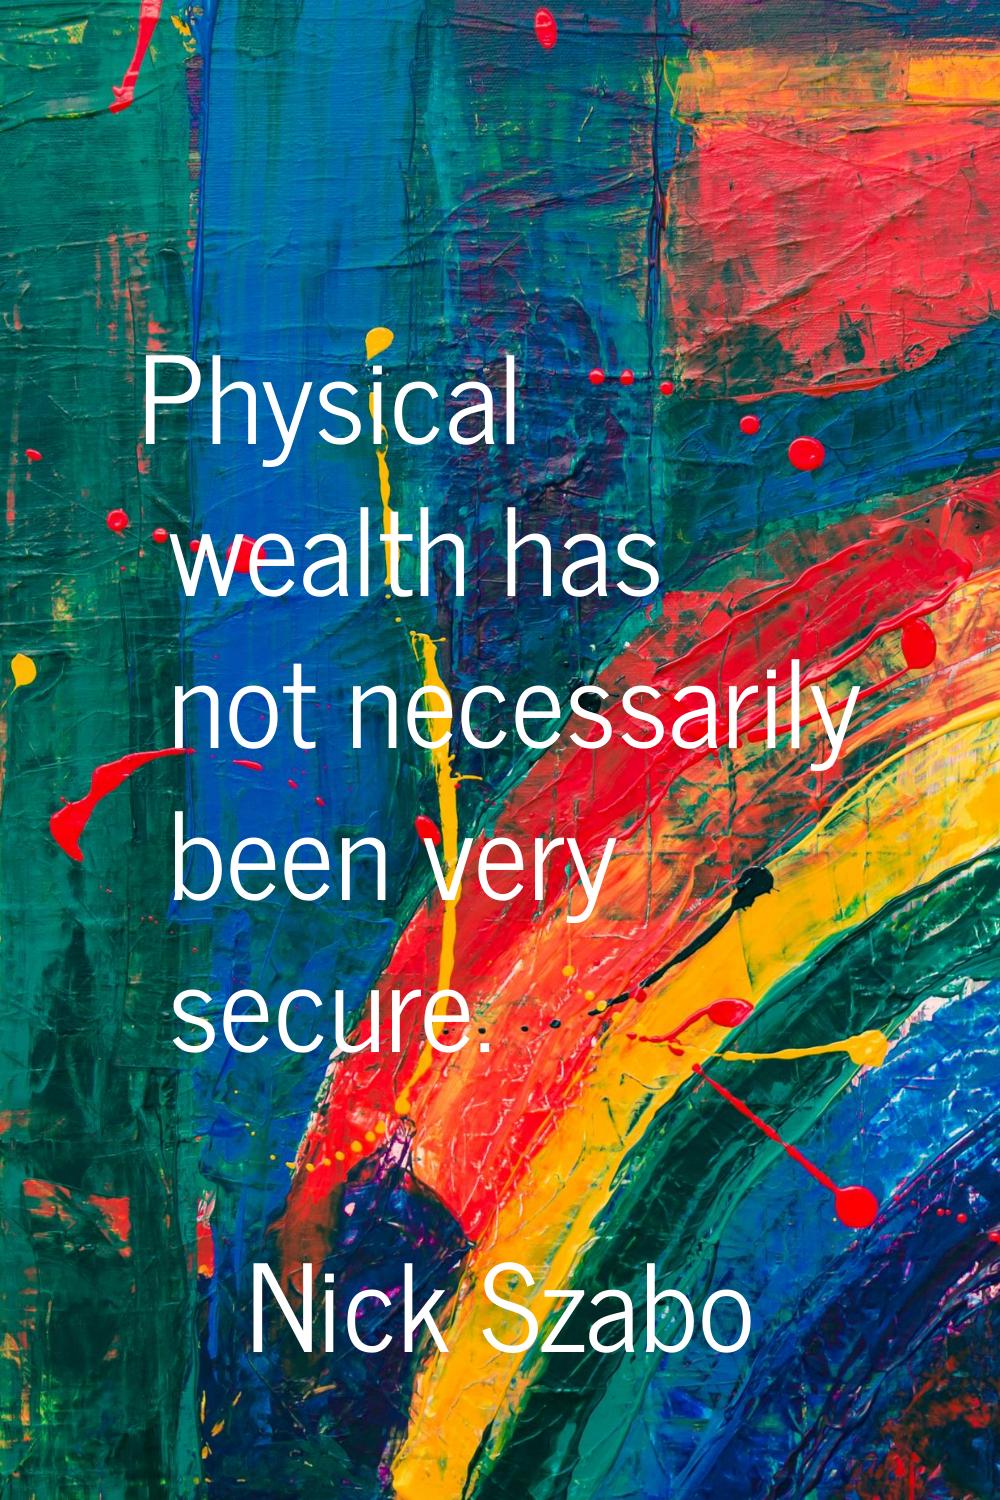 Physical wealth has not necessarily been very secure.